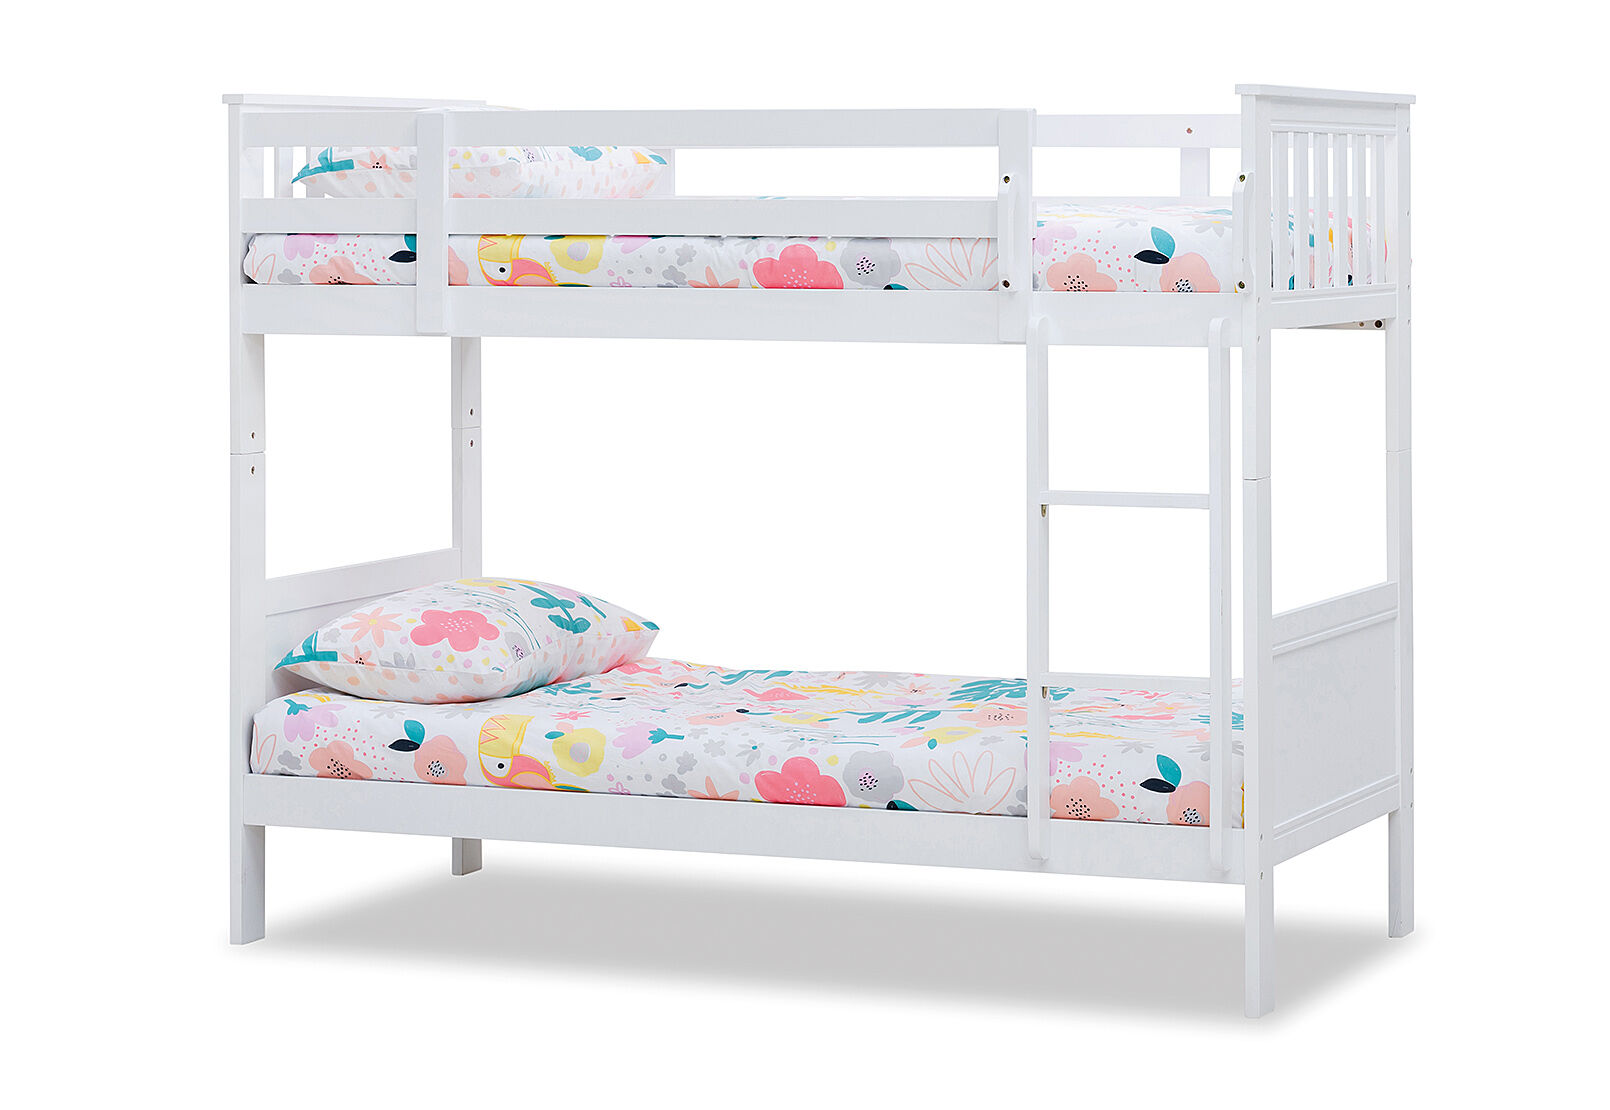 white wooden bunk beds